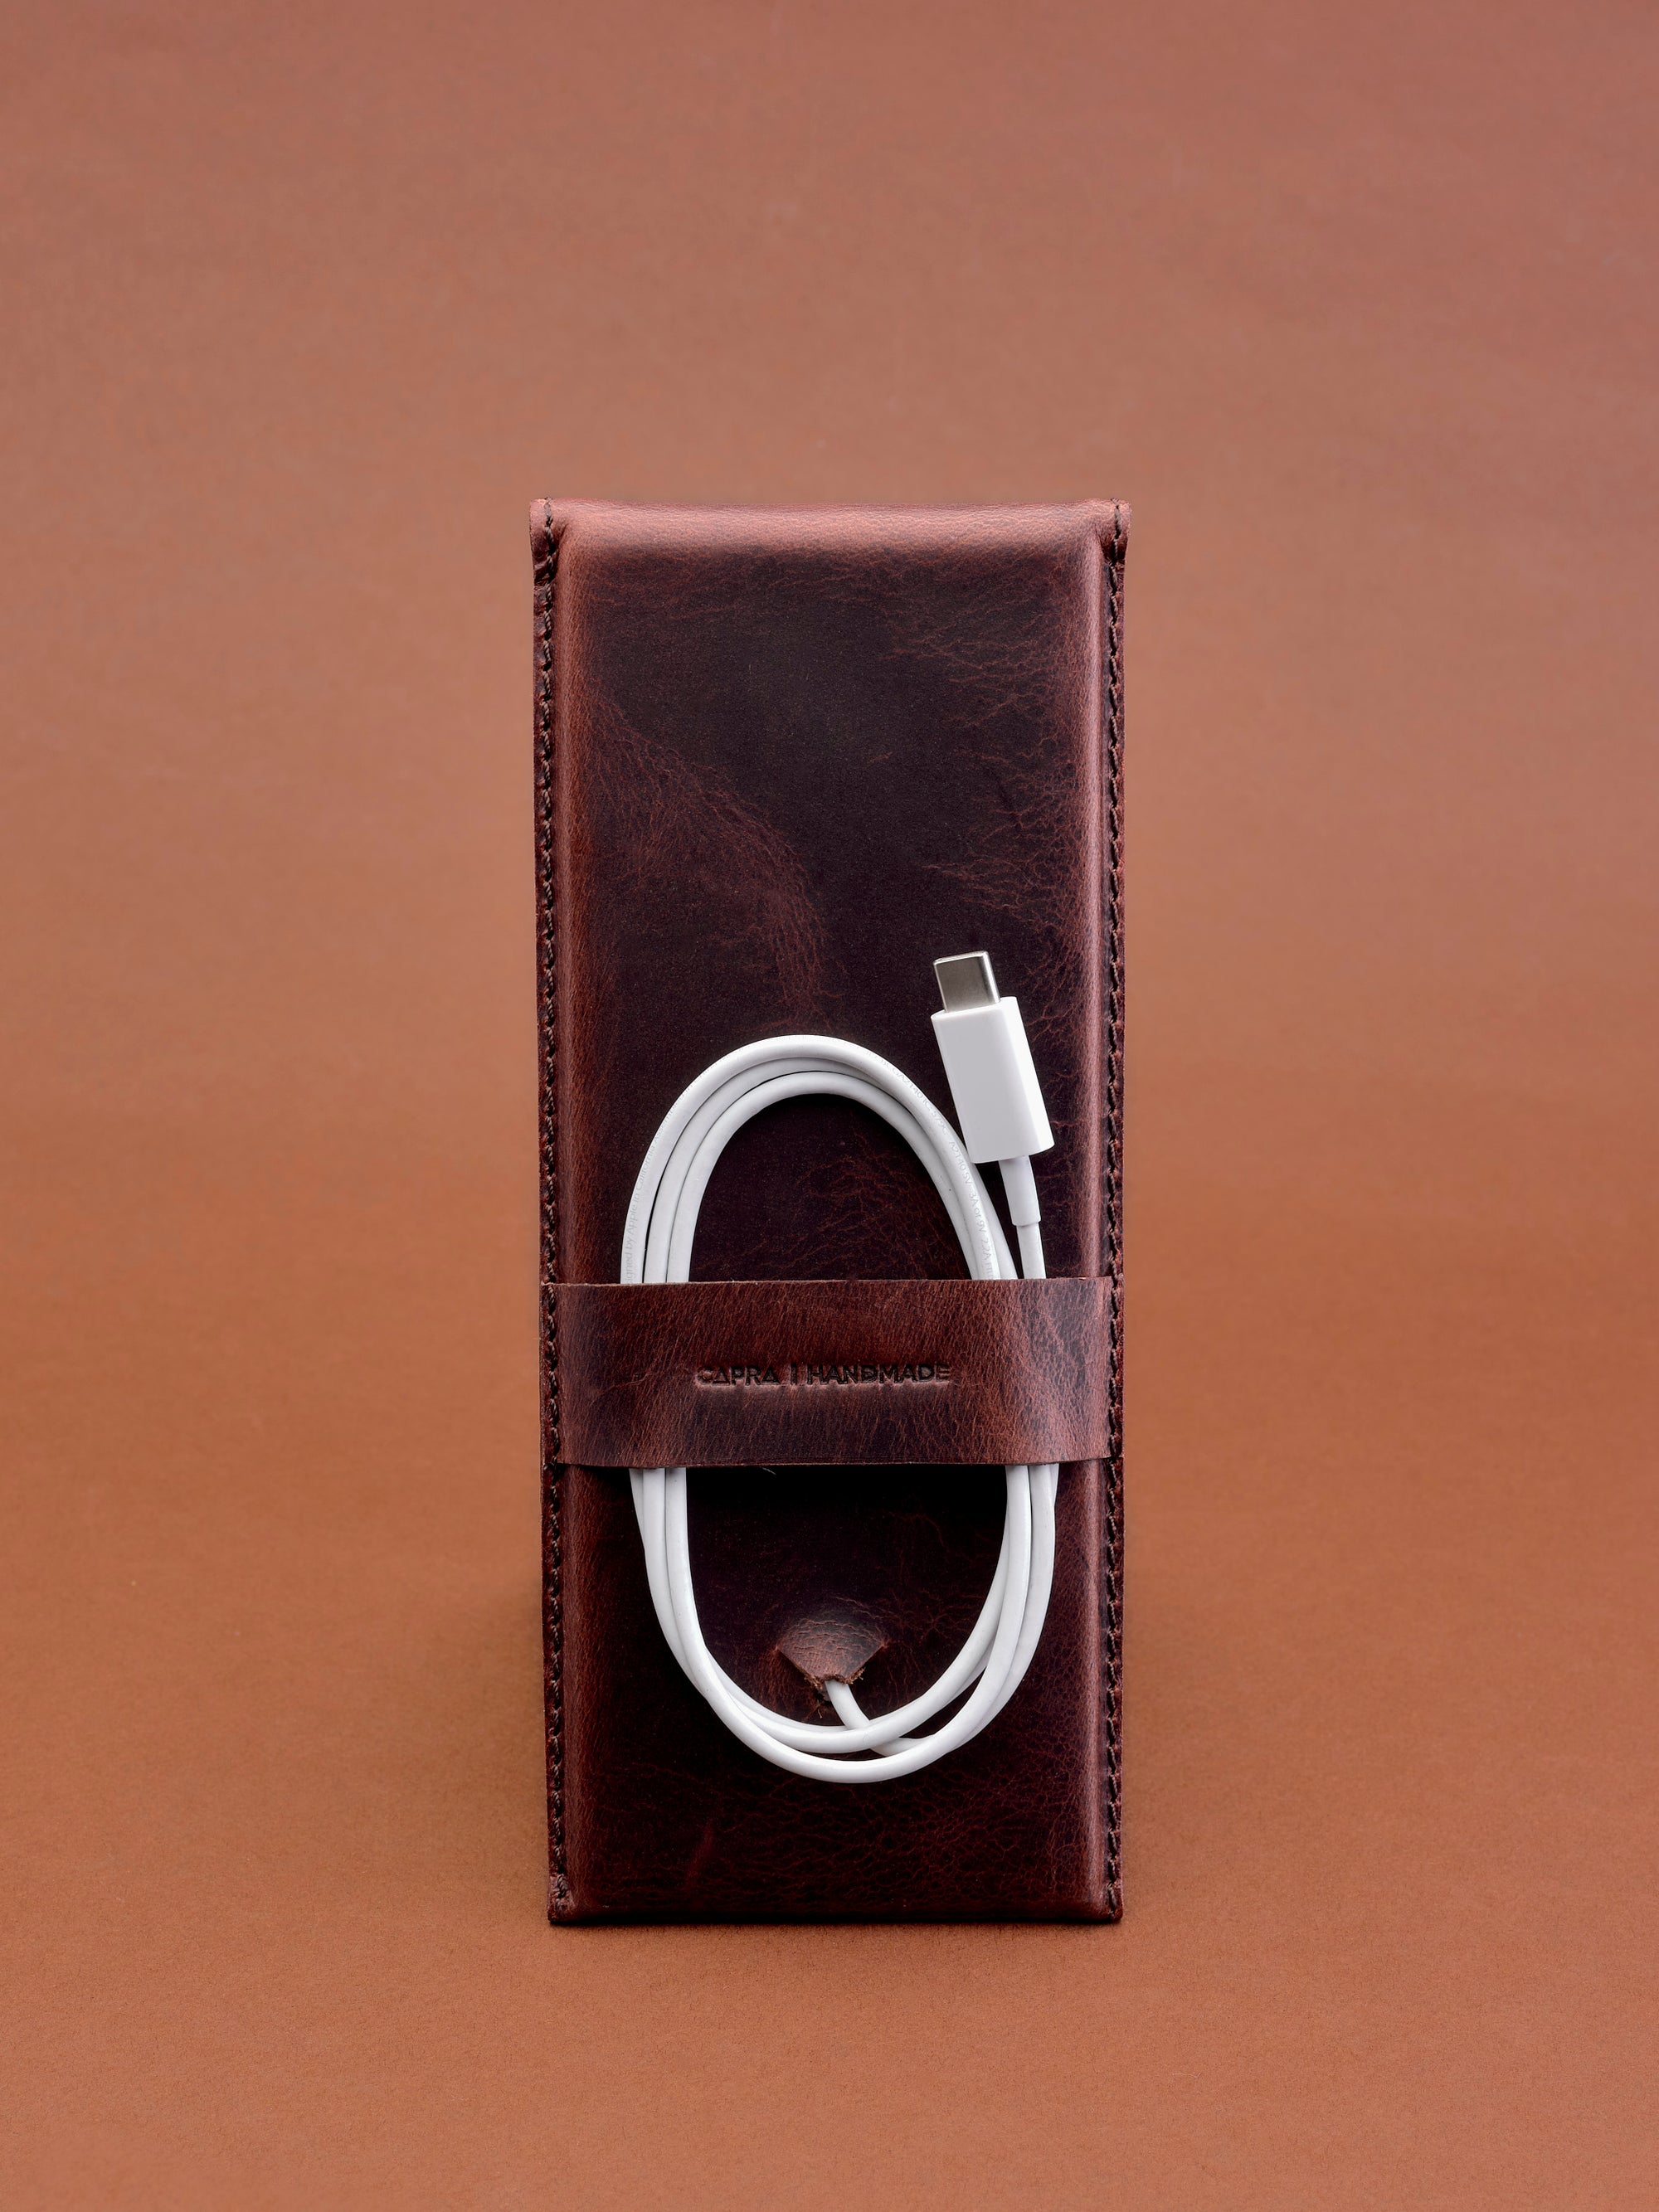 Commuter accessory. MagSafe iPhone Holder Stand Distressed Cognac by Capra Leather